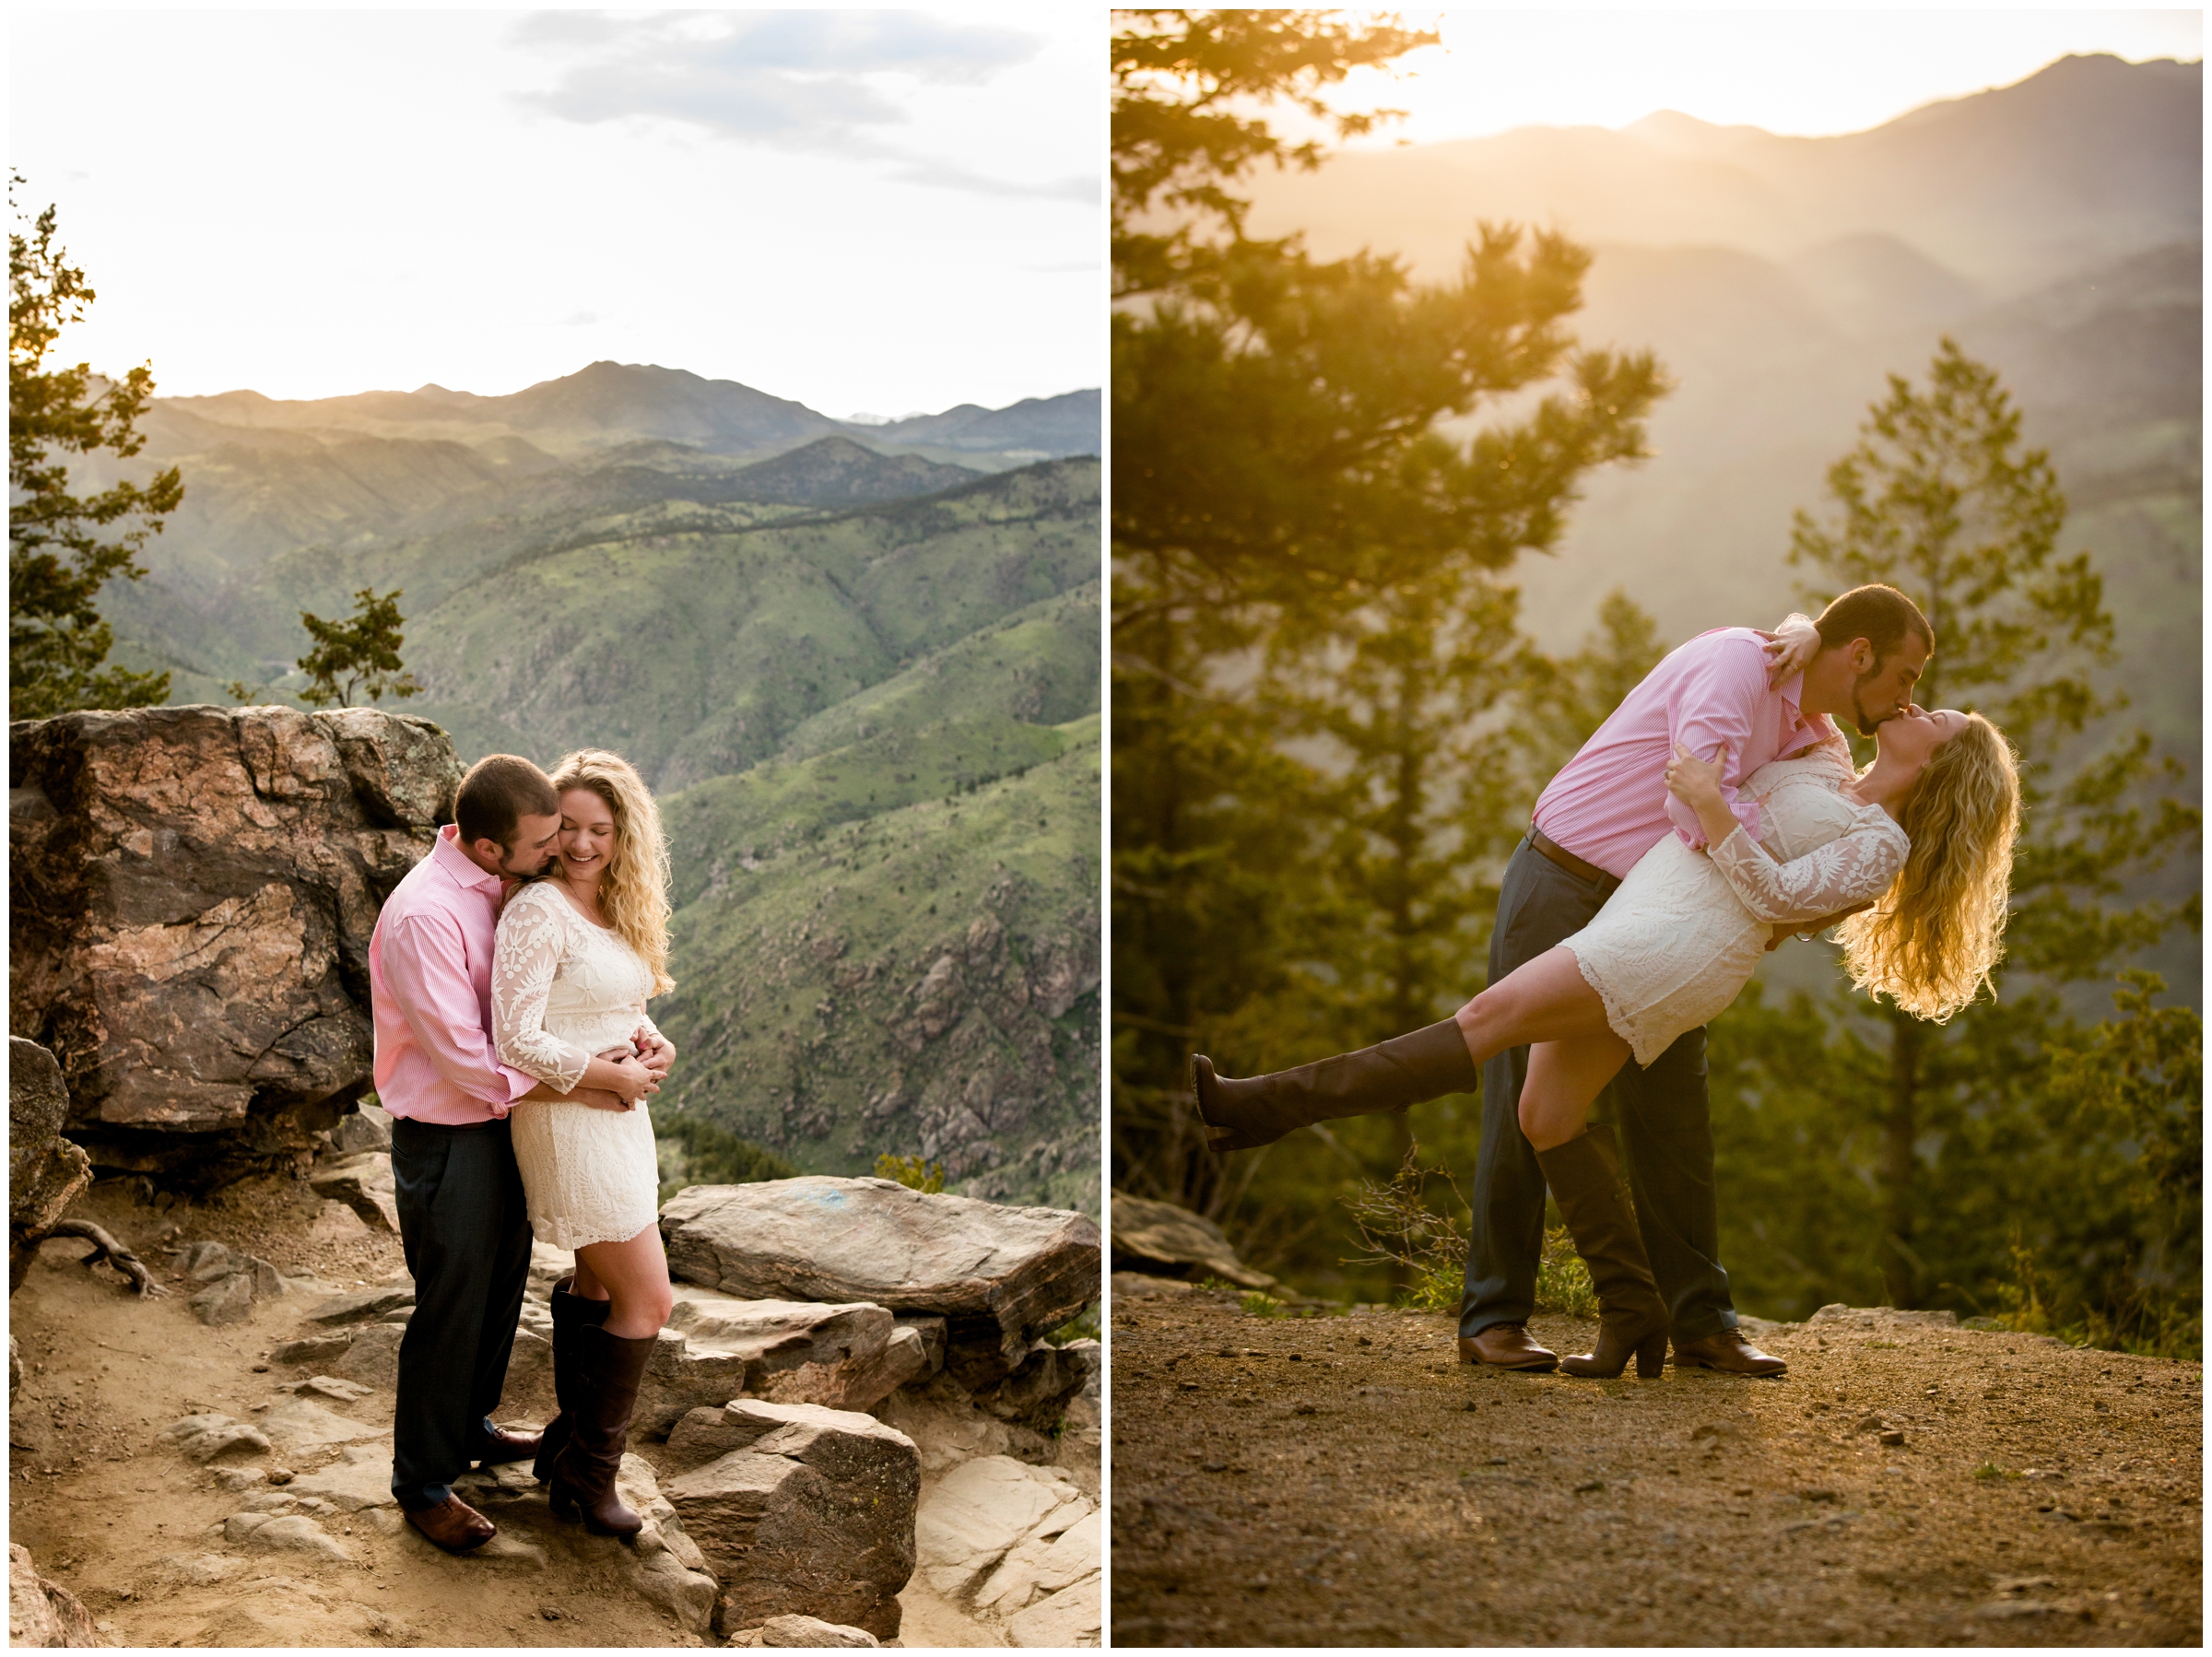 guy dipping girl with mountains and sun in background during Colorado engagement photography session 